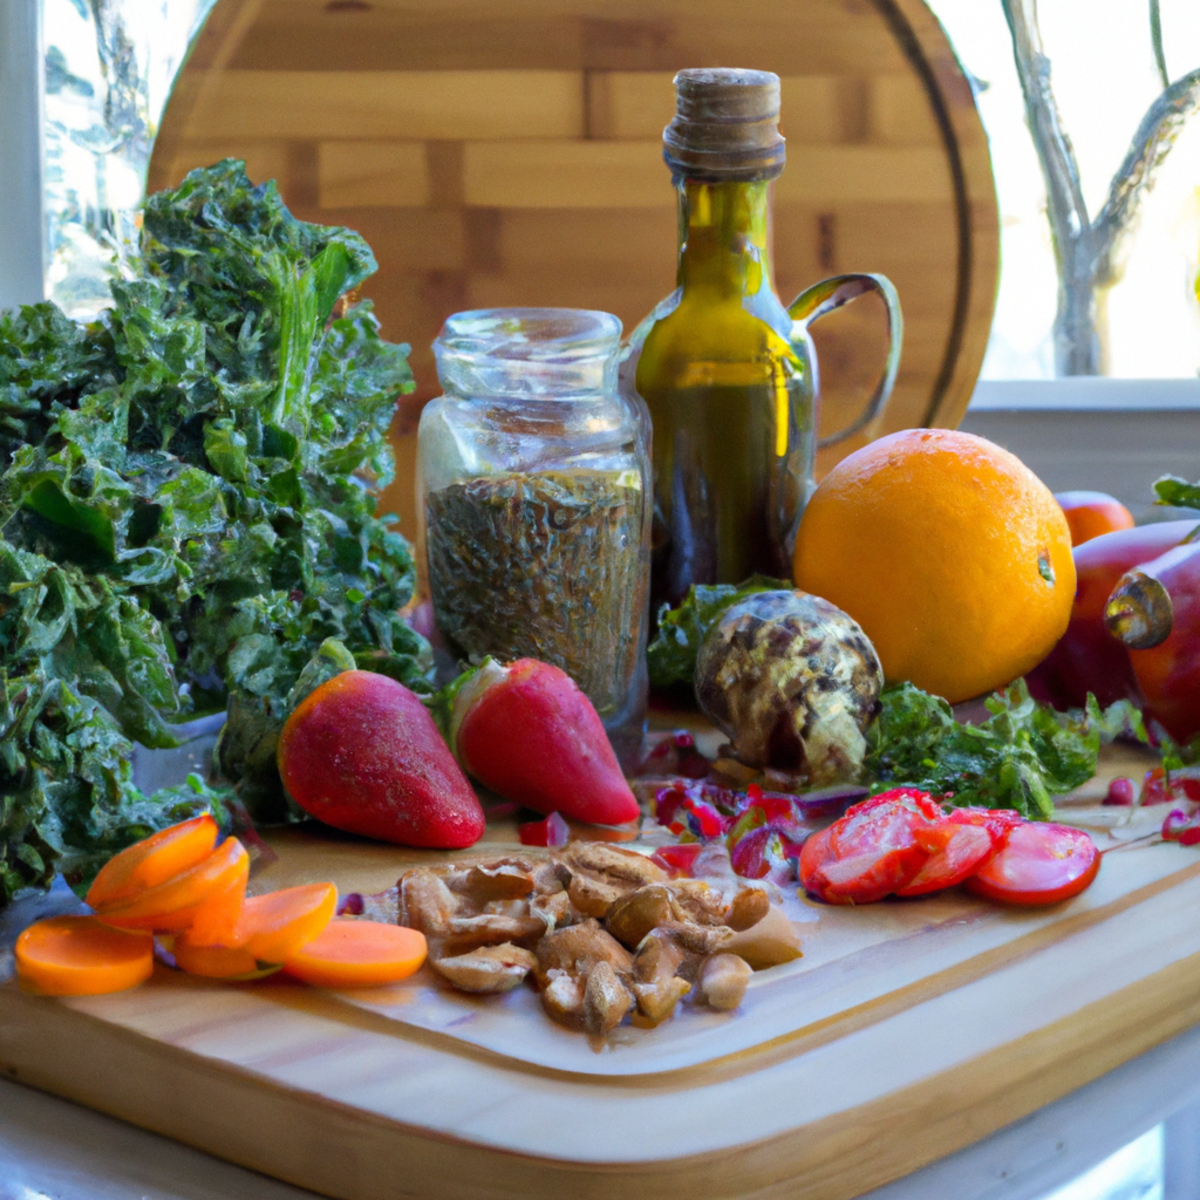 The photo features a wooden cutting board with an array of colorful fruits and vegetables, including bright red strawberries, vibrant orange carrots, and deep green kale. A glass jar filled with quinoa sits next to the board, while a small dish of sliced almonds and a bottle of olive oil complete the scene. The natural lighting highlights the freshness of the ingredients, making them look almost too good to eat. The composition of the photo suggests a balanced and wholesome approach to eating, emphasizing the importance of incorporating gluten-free foods into a healthy lifestyle.